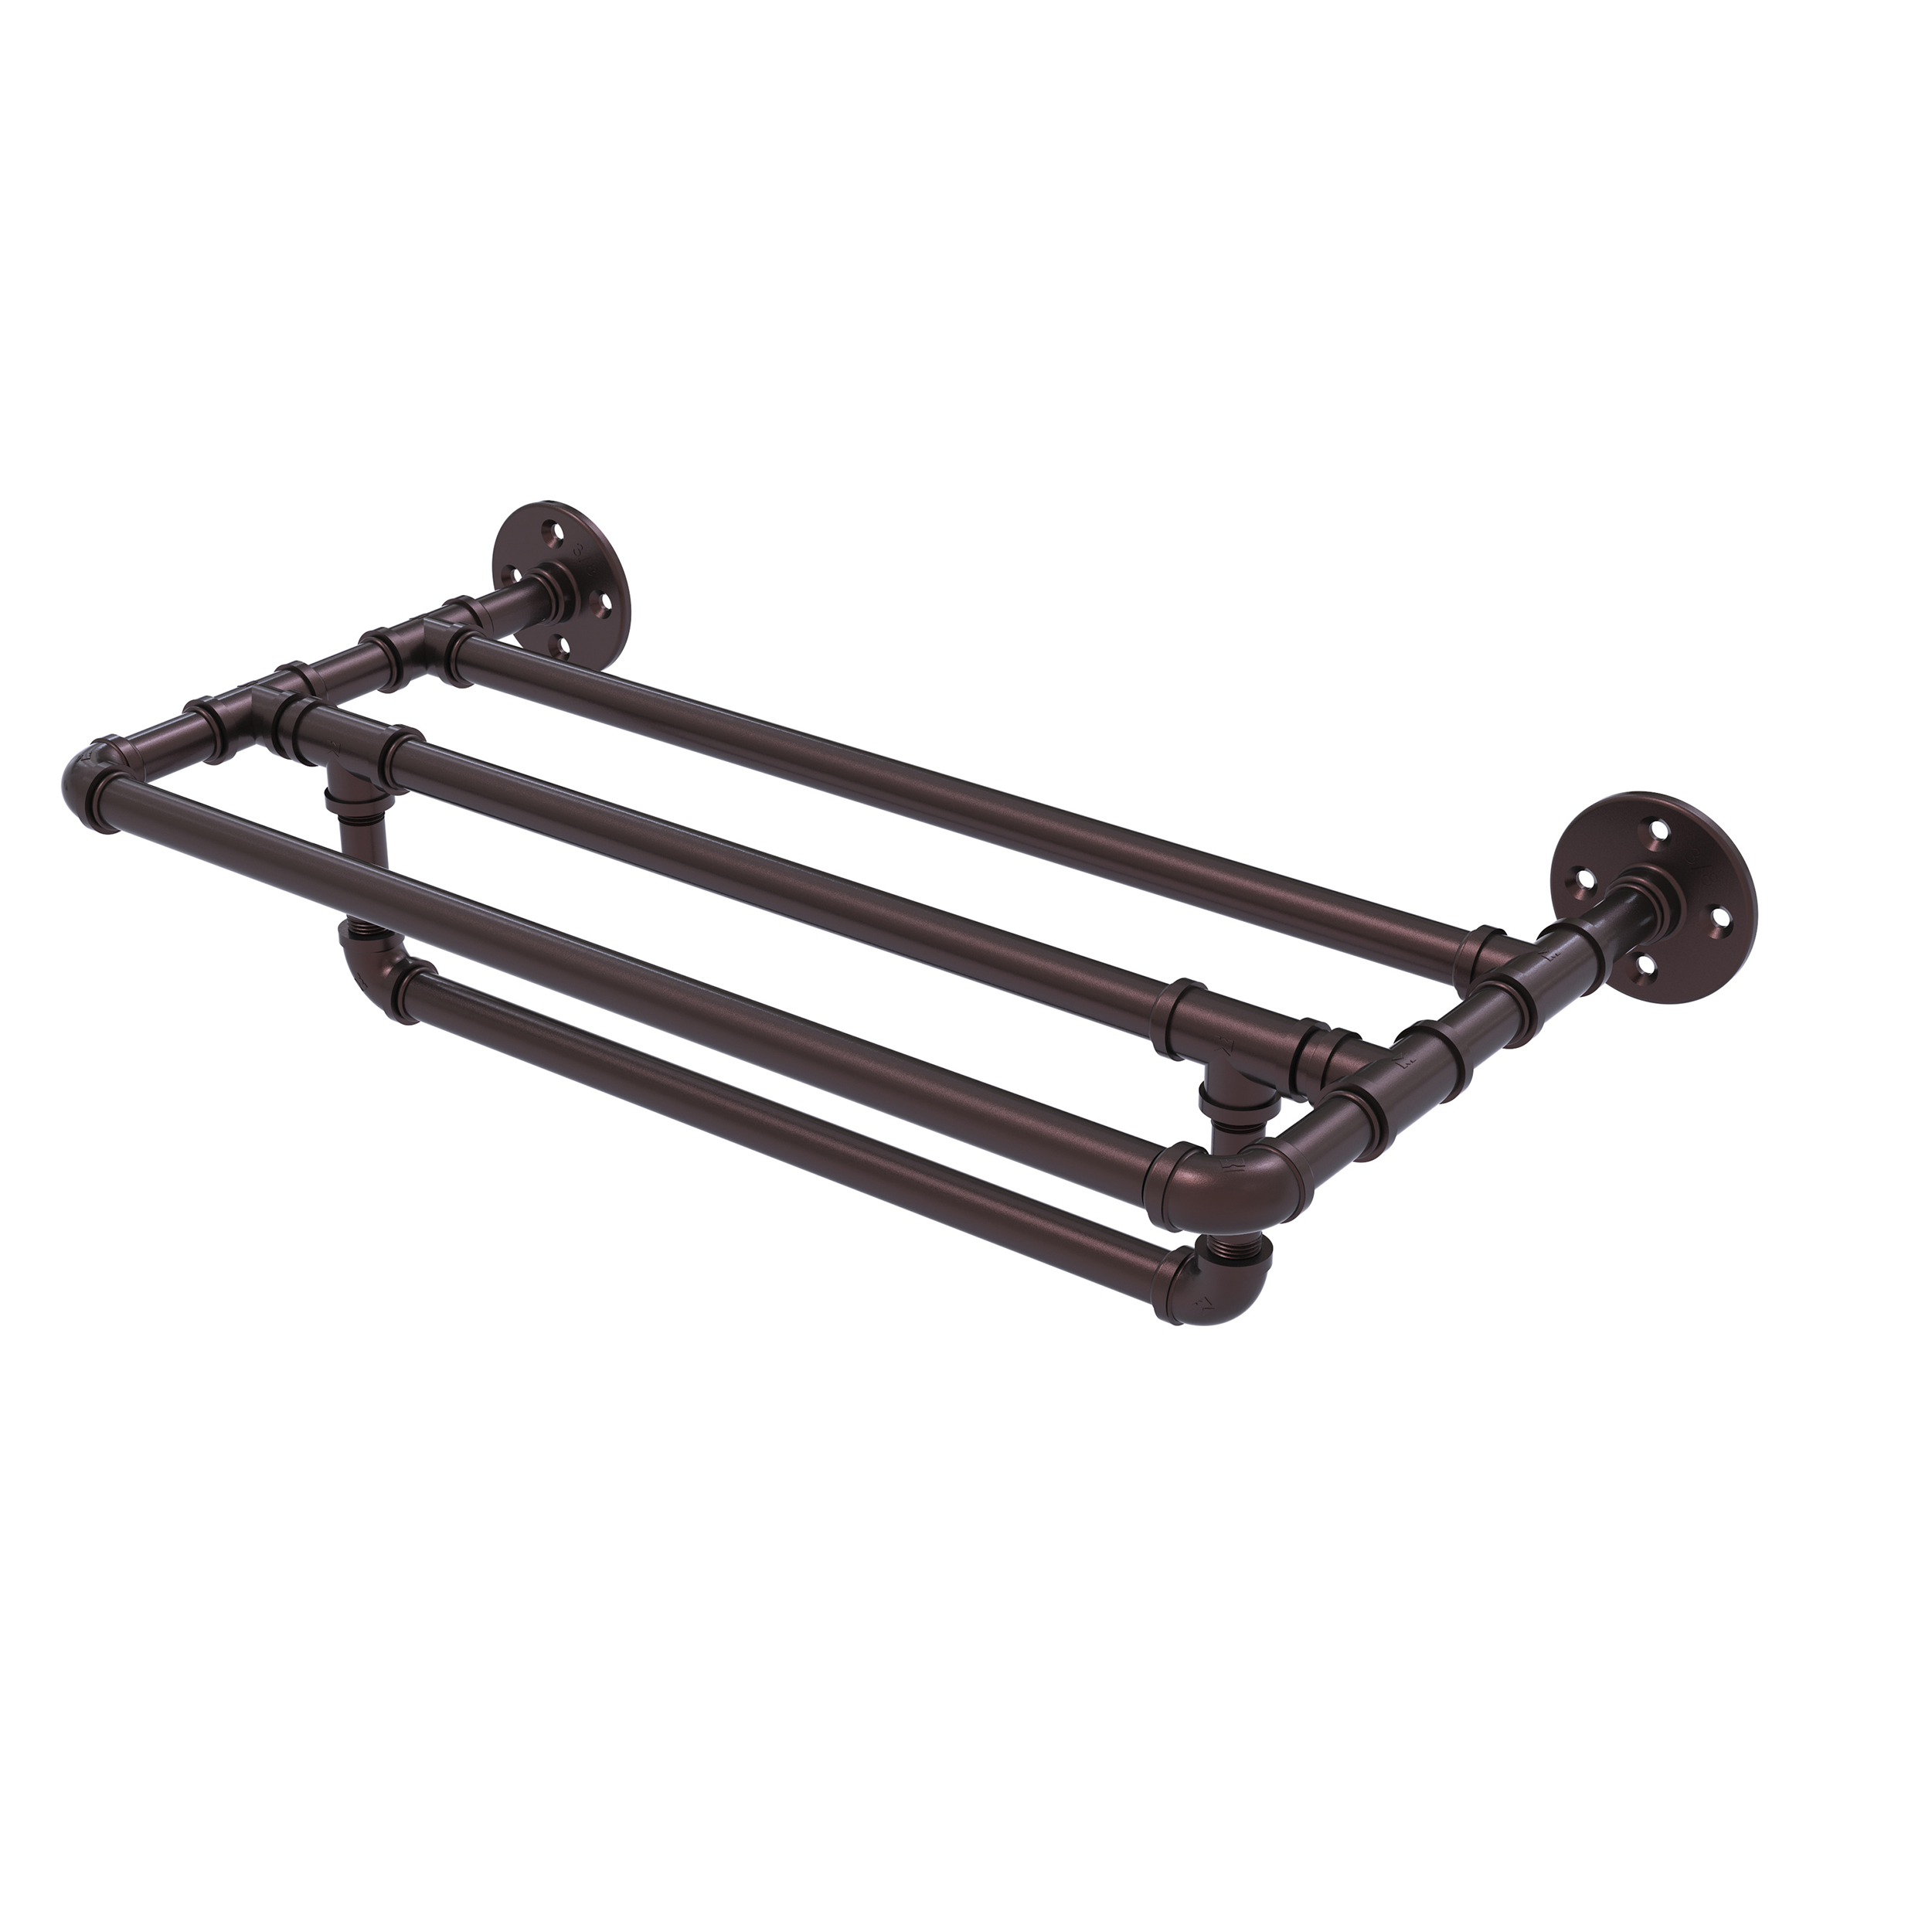 36" Wall Mounted Towel Shelf With Towel Bar, Antique Bronze Finish